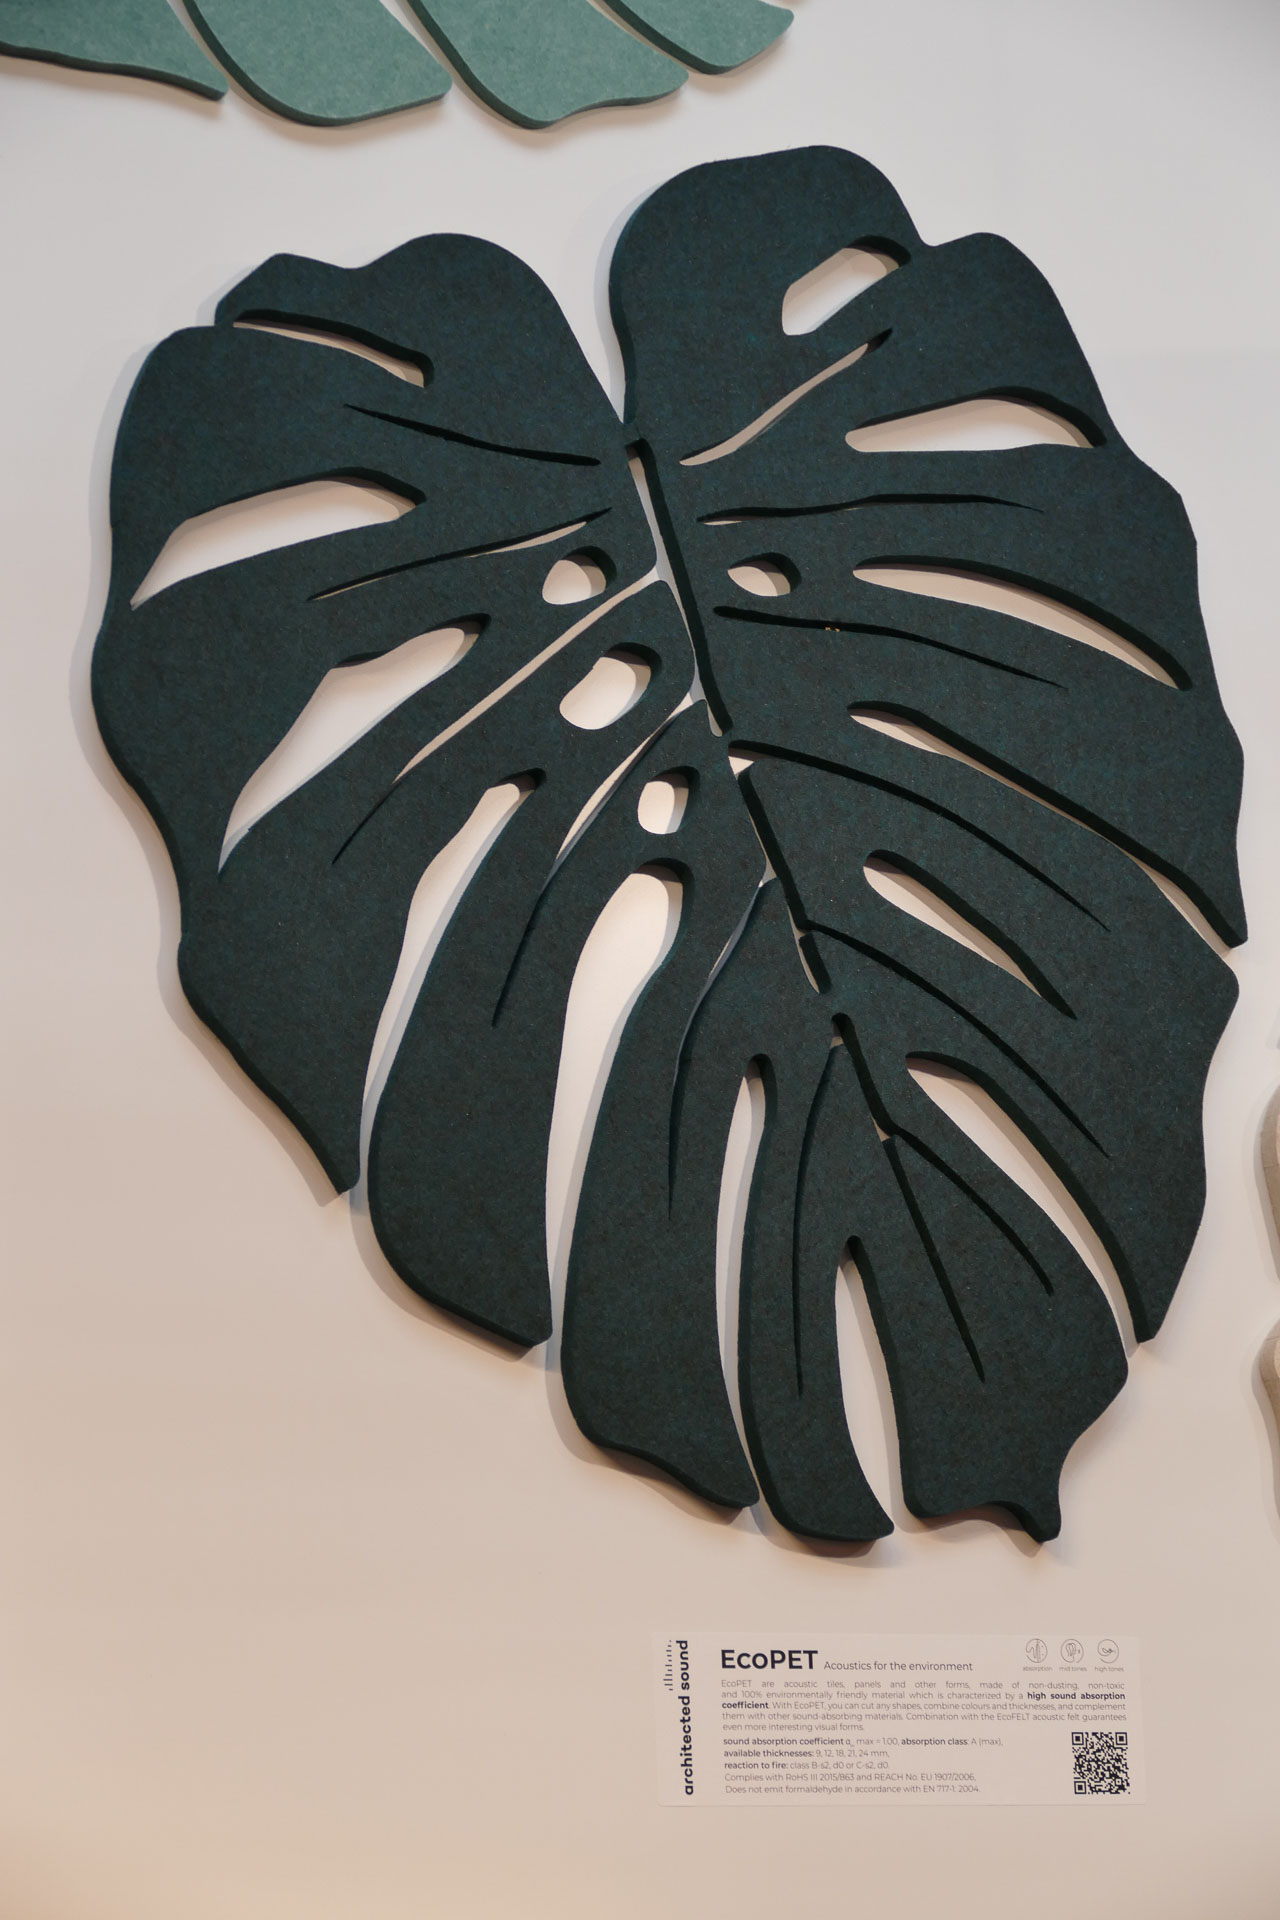 Sound absorbing wall cladding in monstera leaf shape